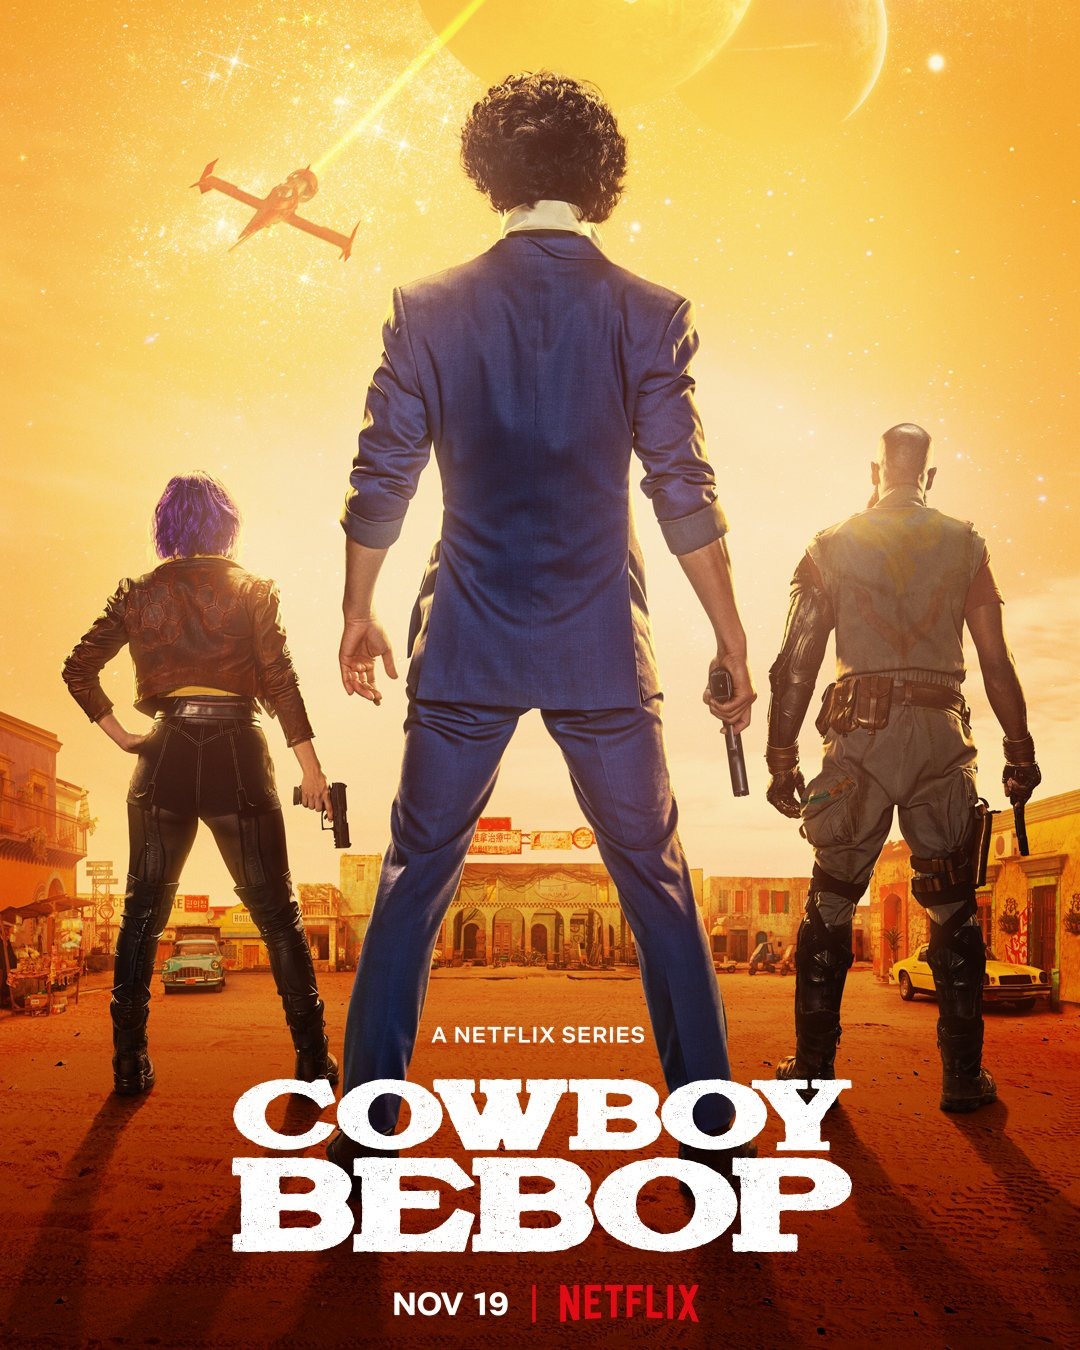 What are the chances of the show “Cowboy Bepop” being available on Netflix